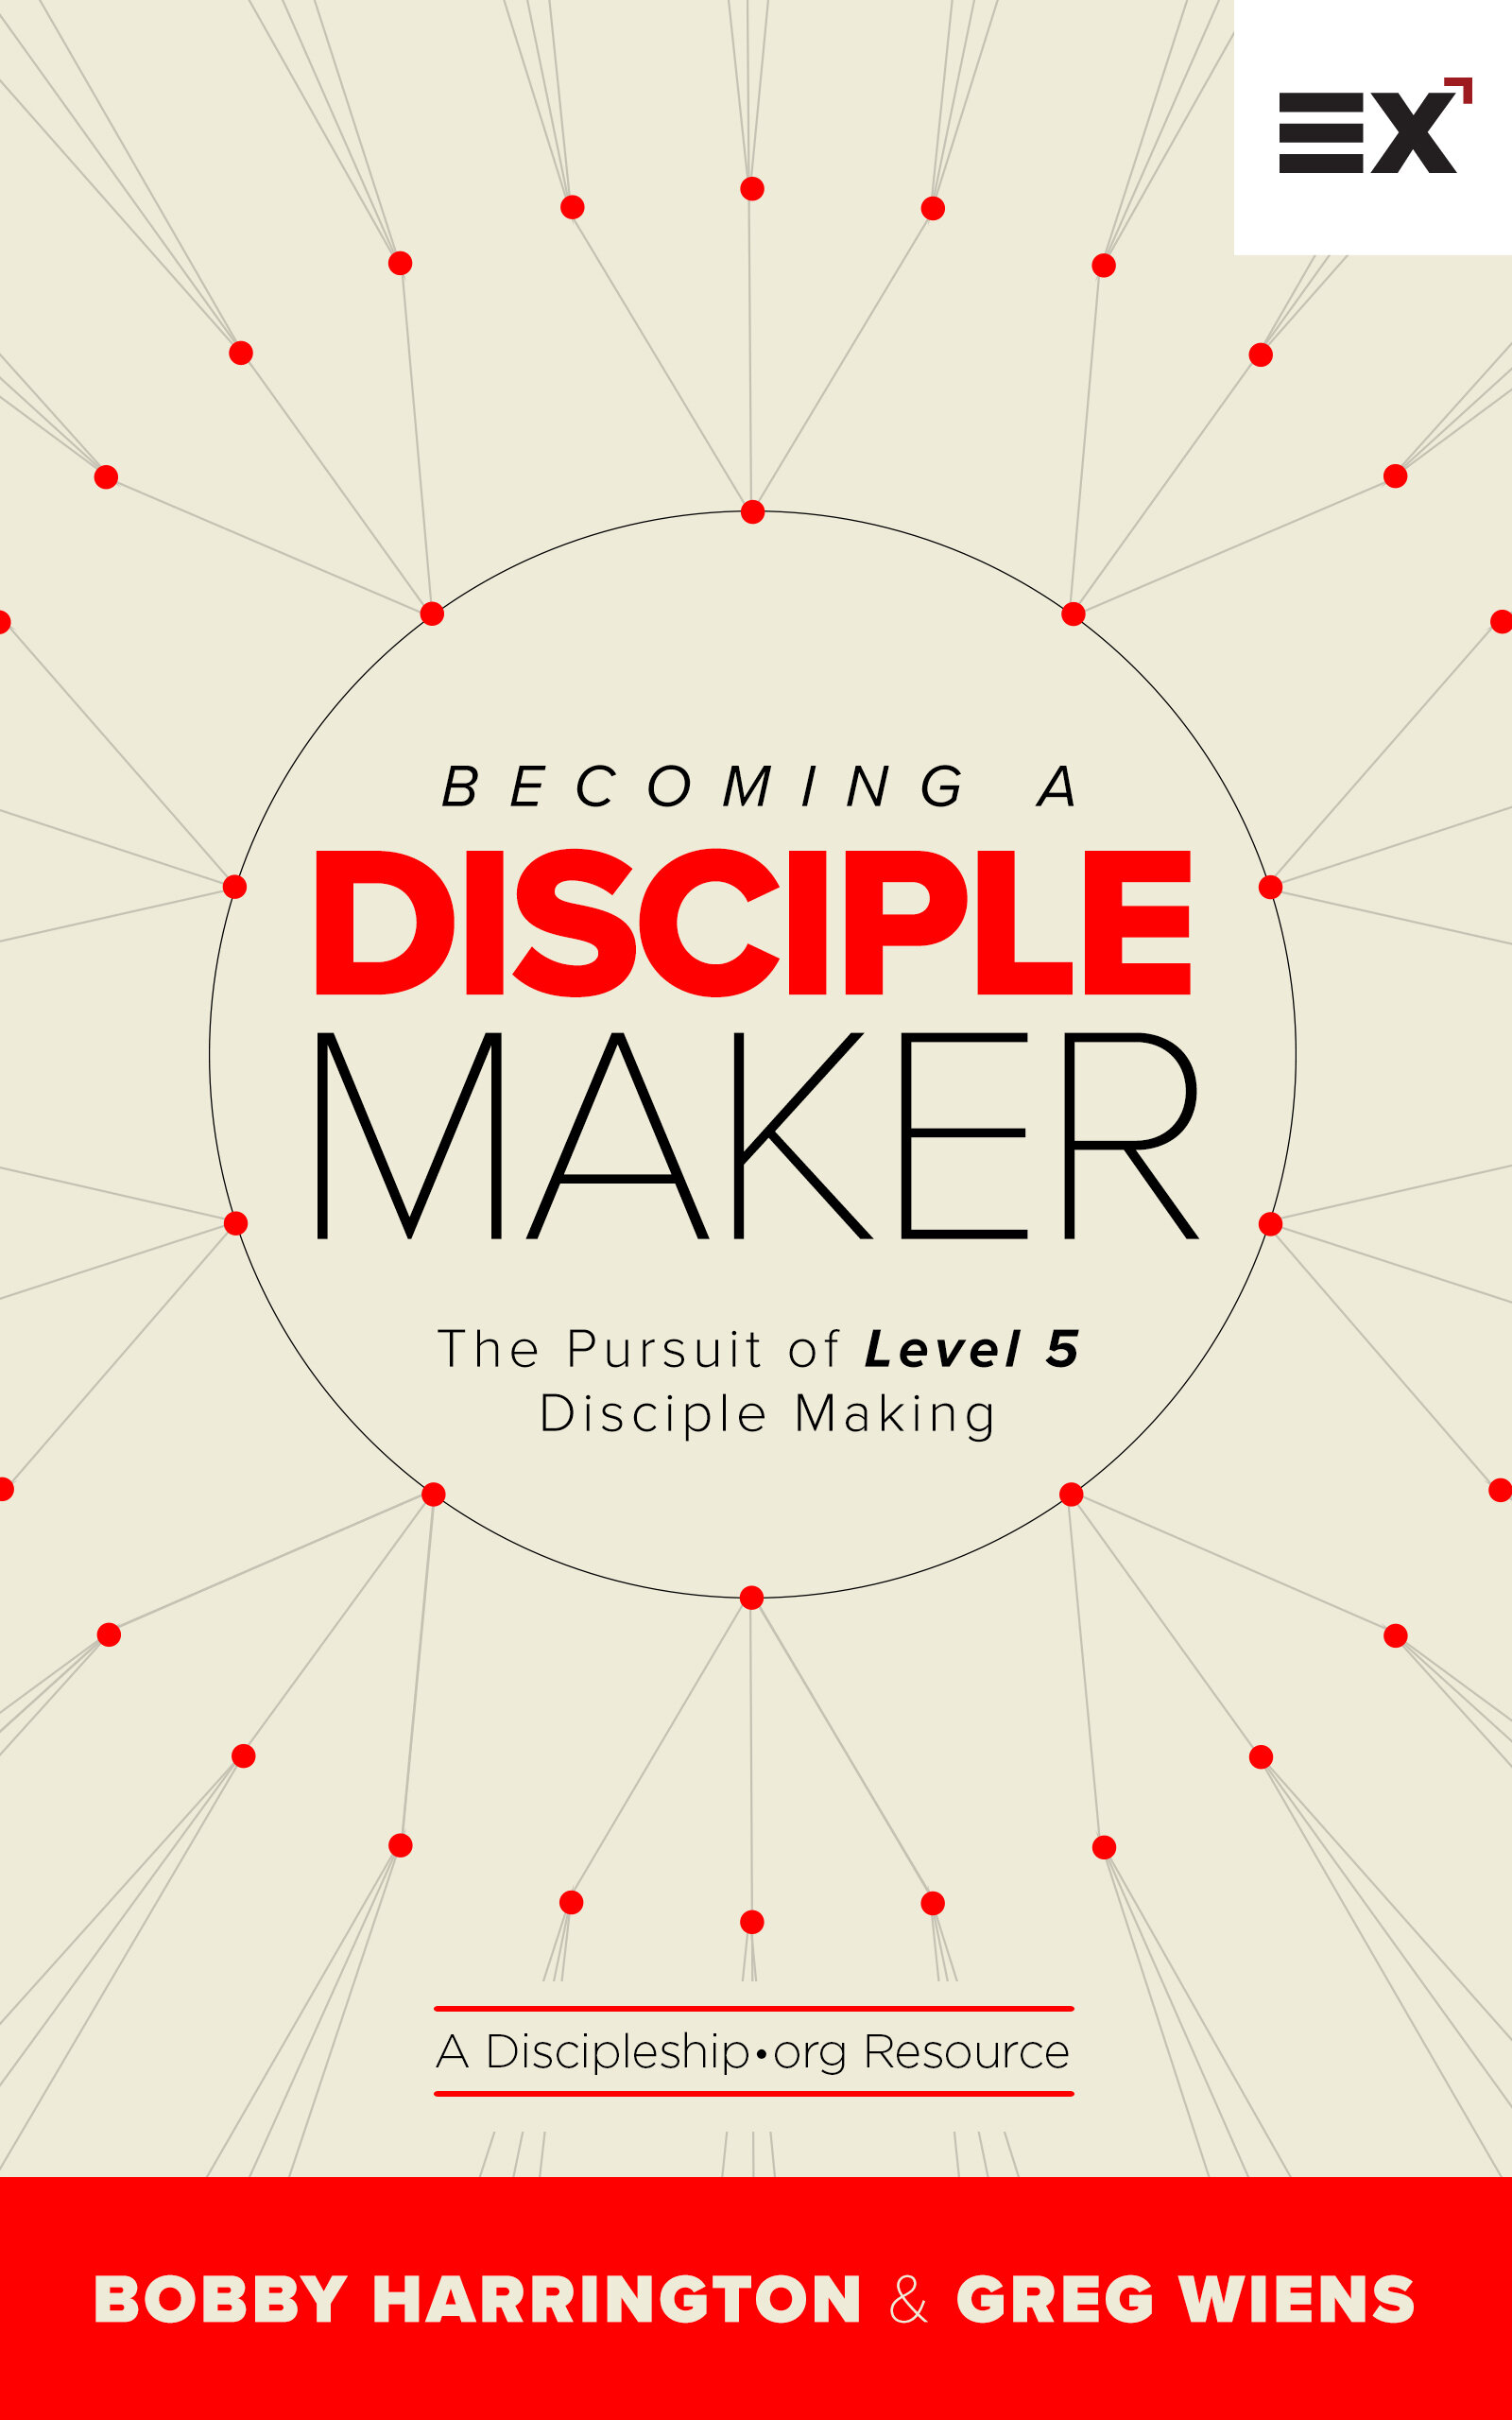 Becoming a Disciple Maker, The Pursuit of Level 5 Disciple Making